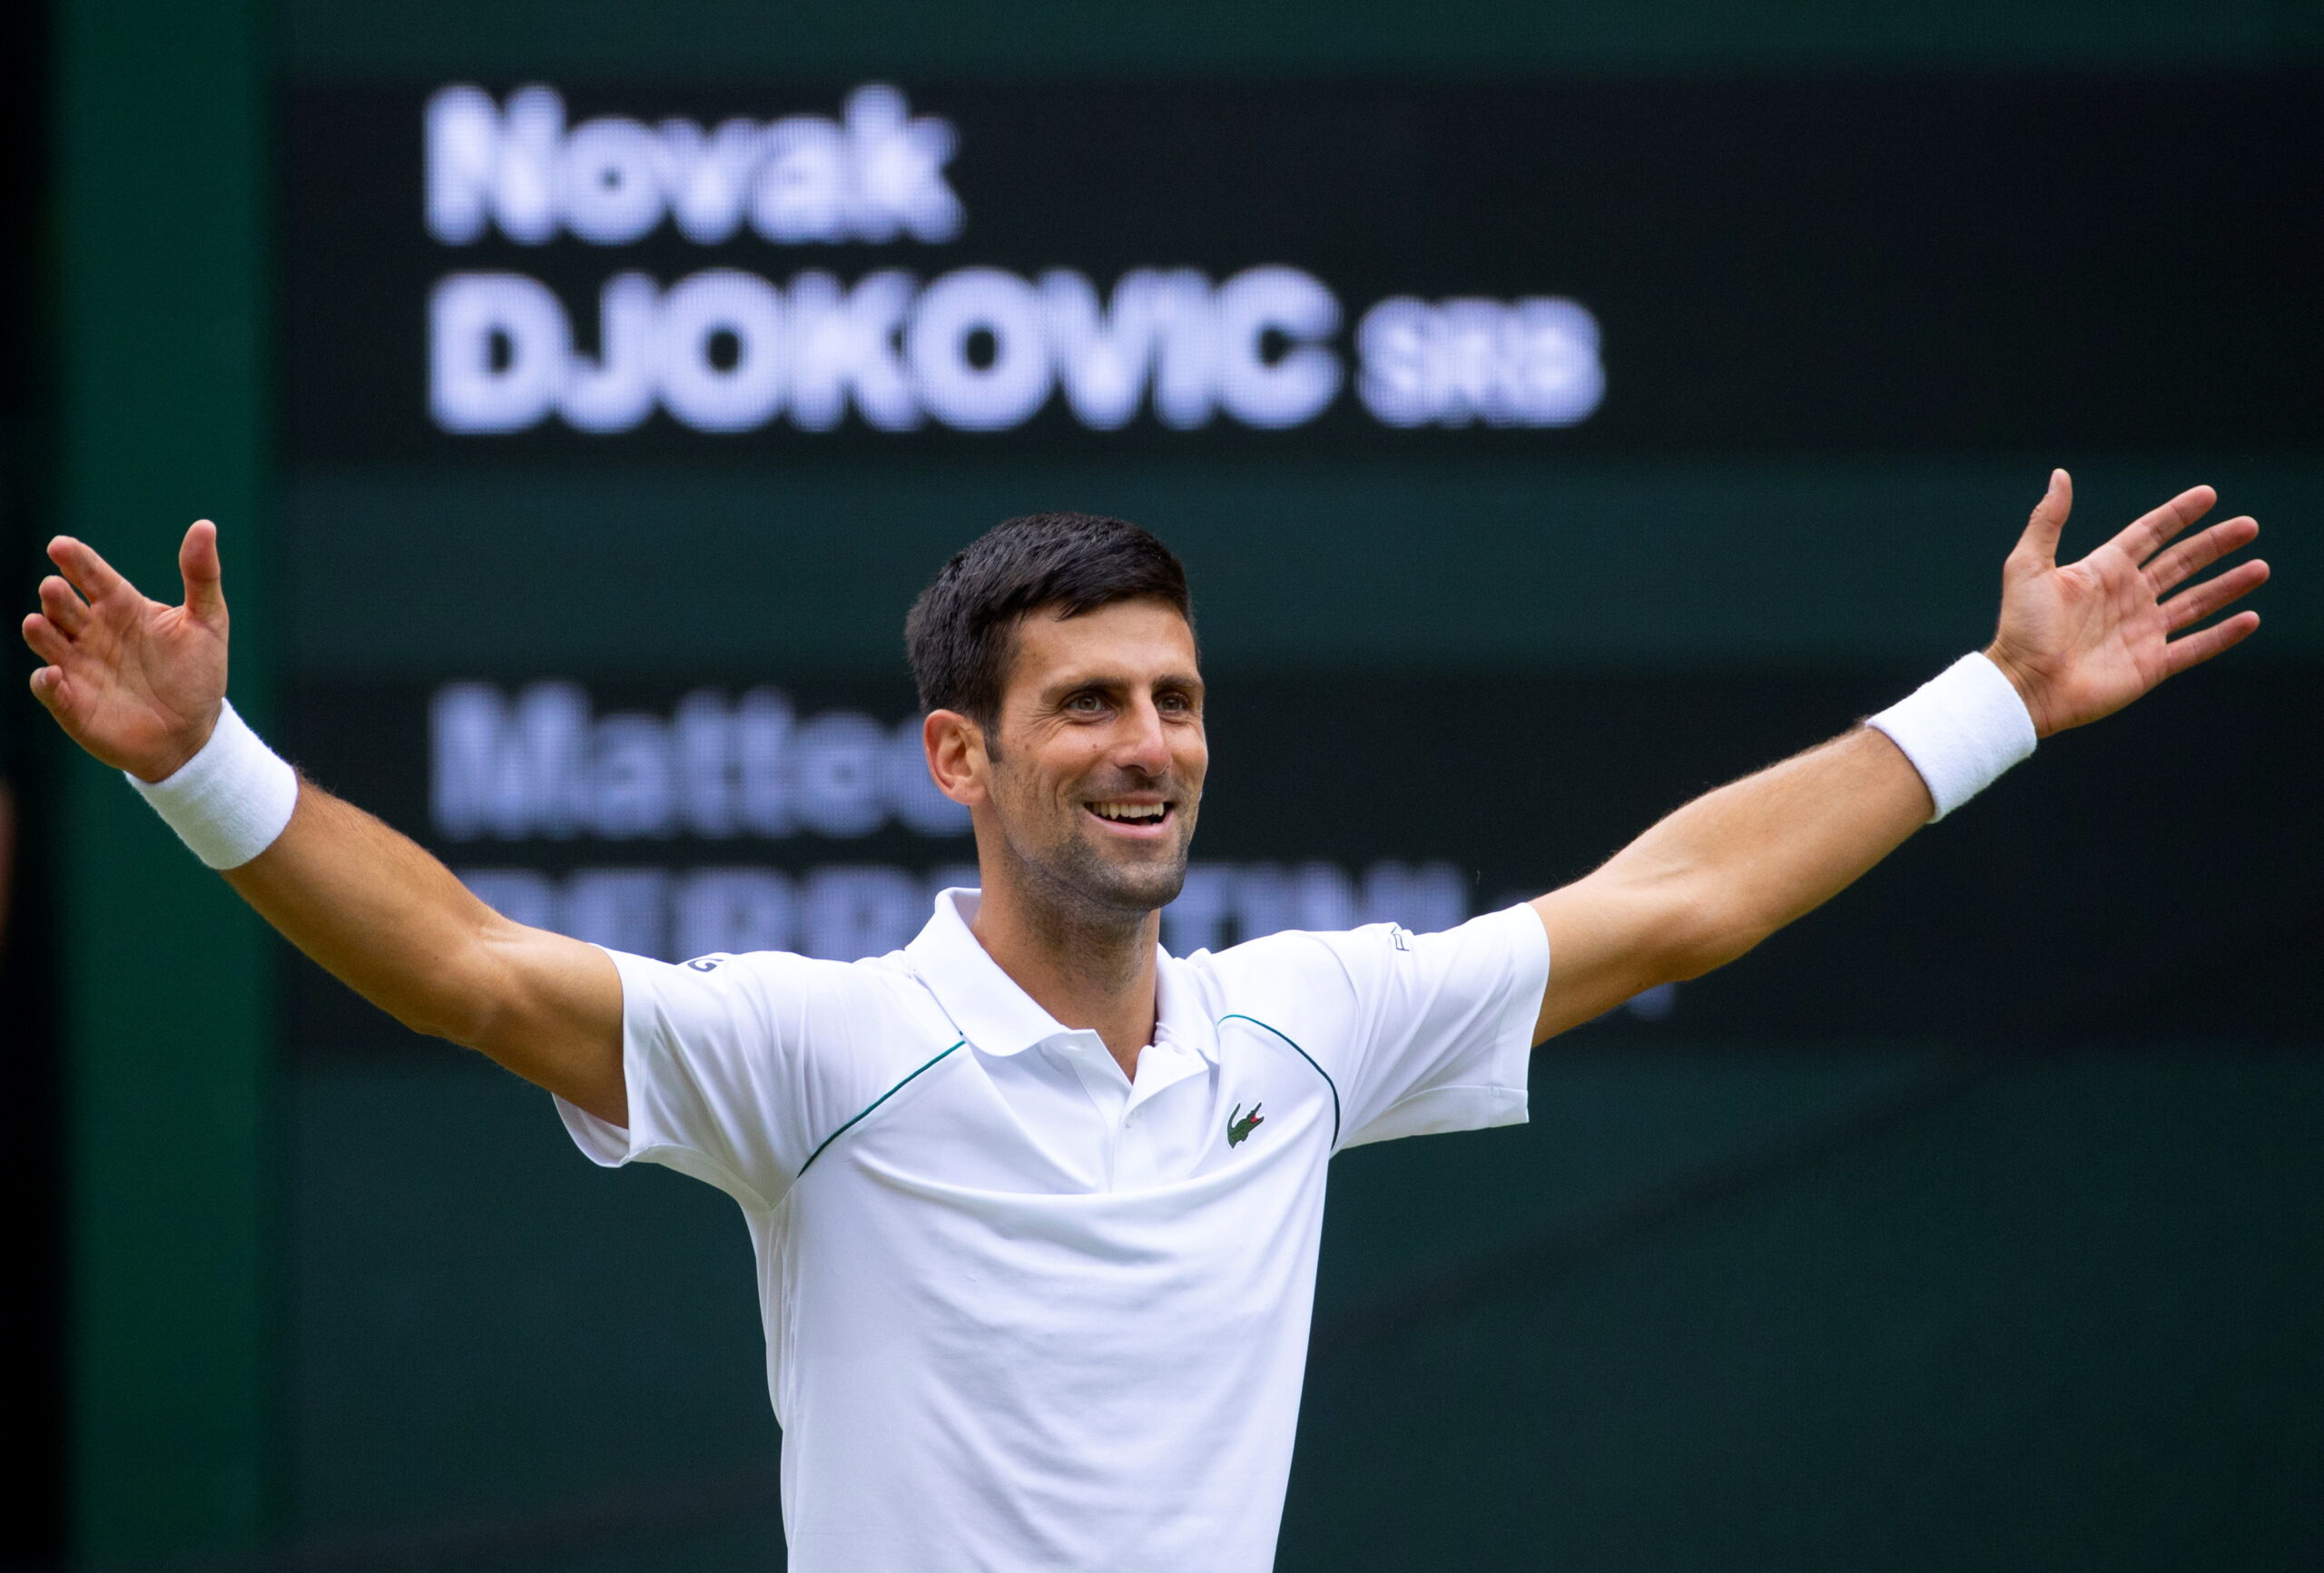  Djokovic becomes first player to qualify for ATP Finals after Wimbledon win